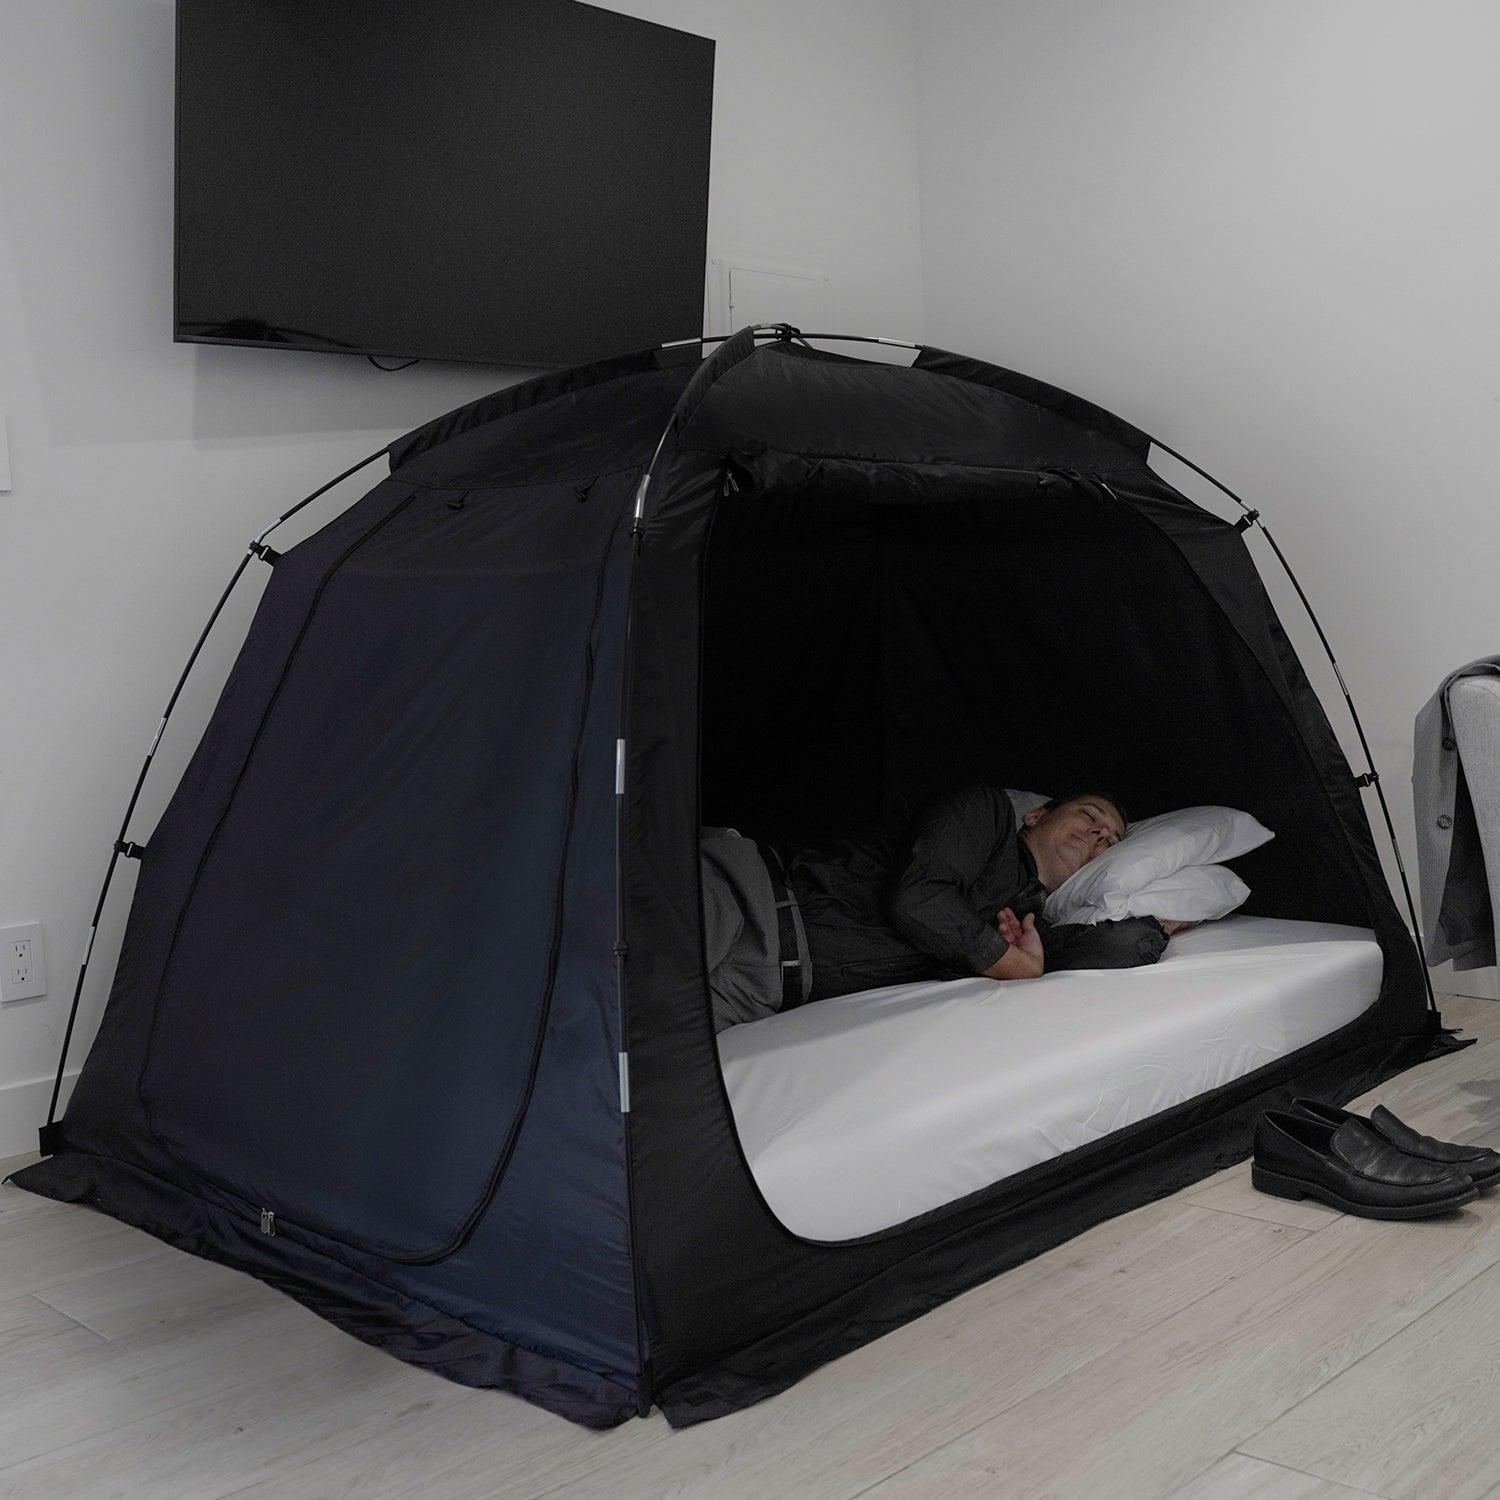 Portable Privacy Bed Tent with a man inside